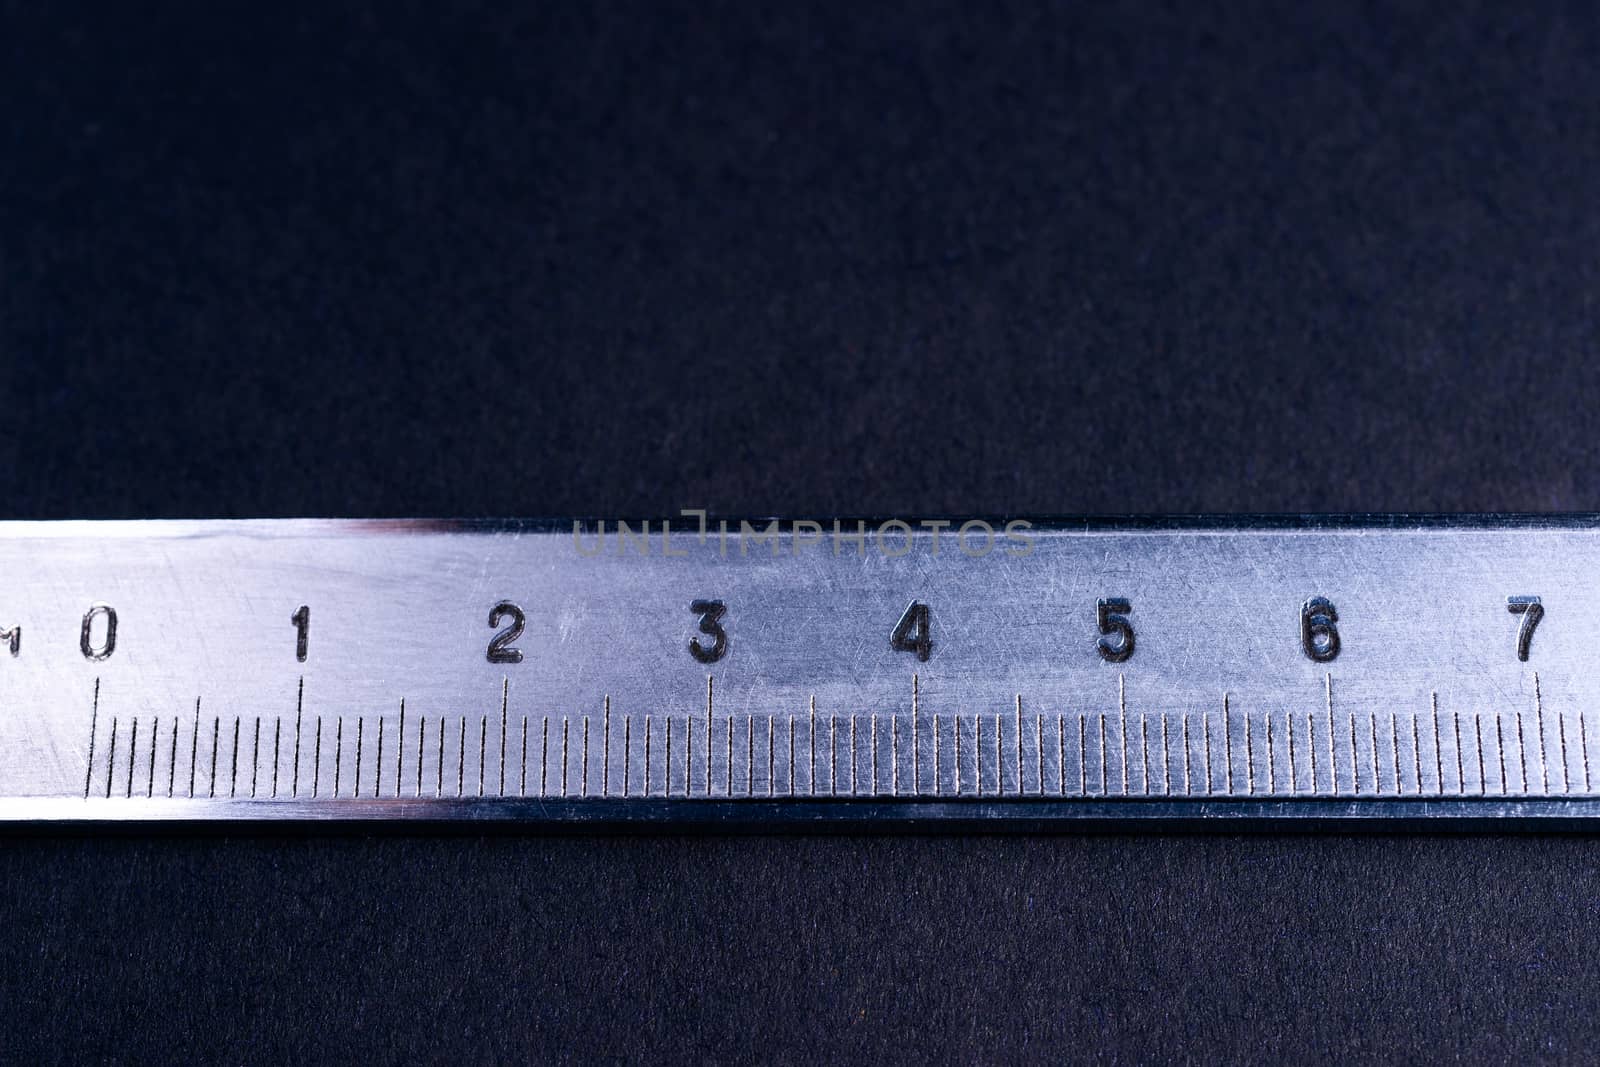 Vintage steel caliper metric scale on dark background. Scale in focus. Tools in very good condition. Stock photo on blurred dark gray background.